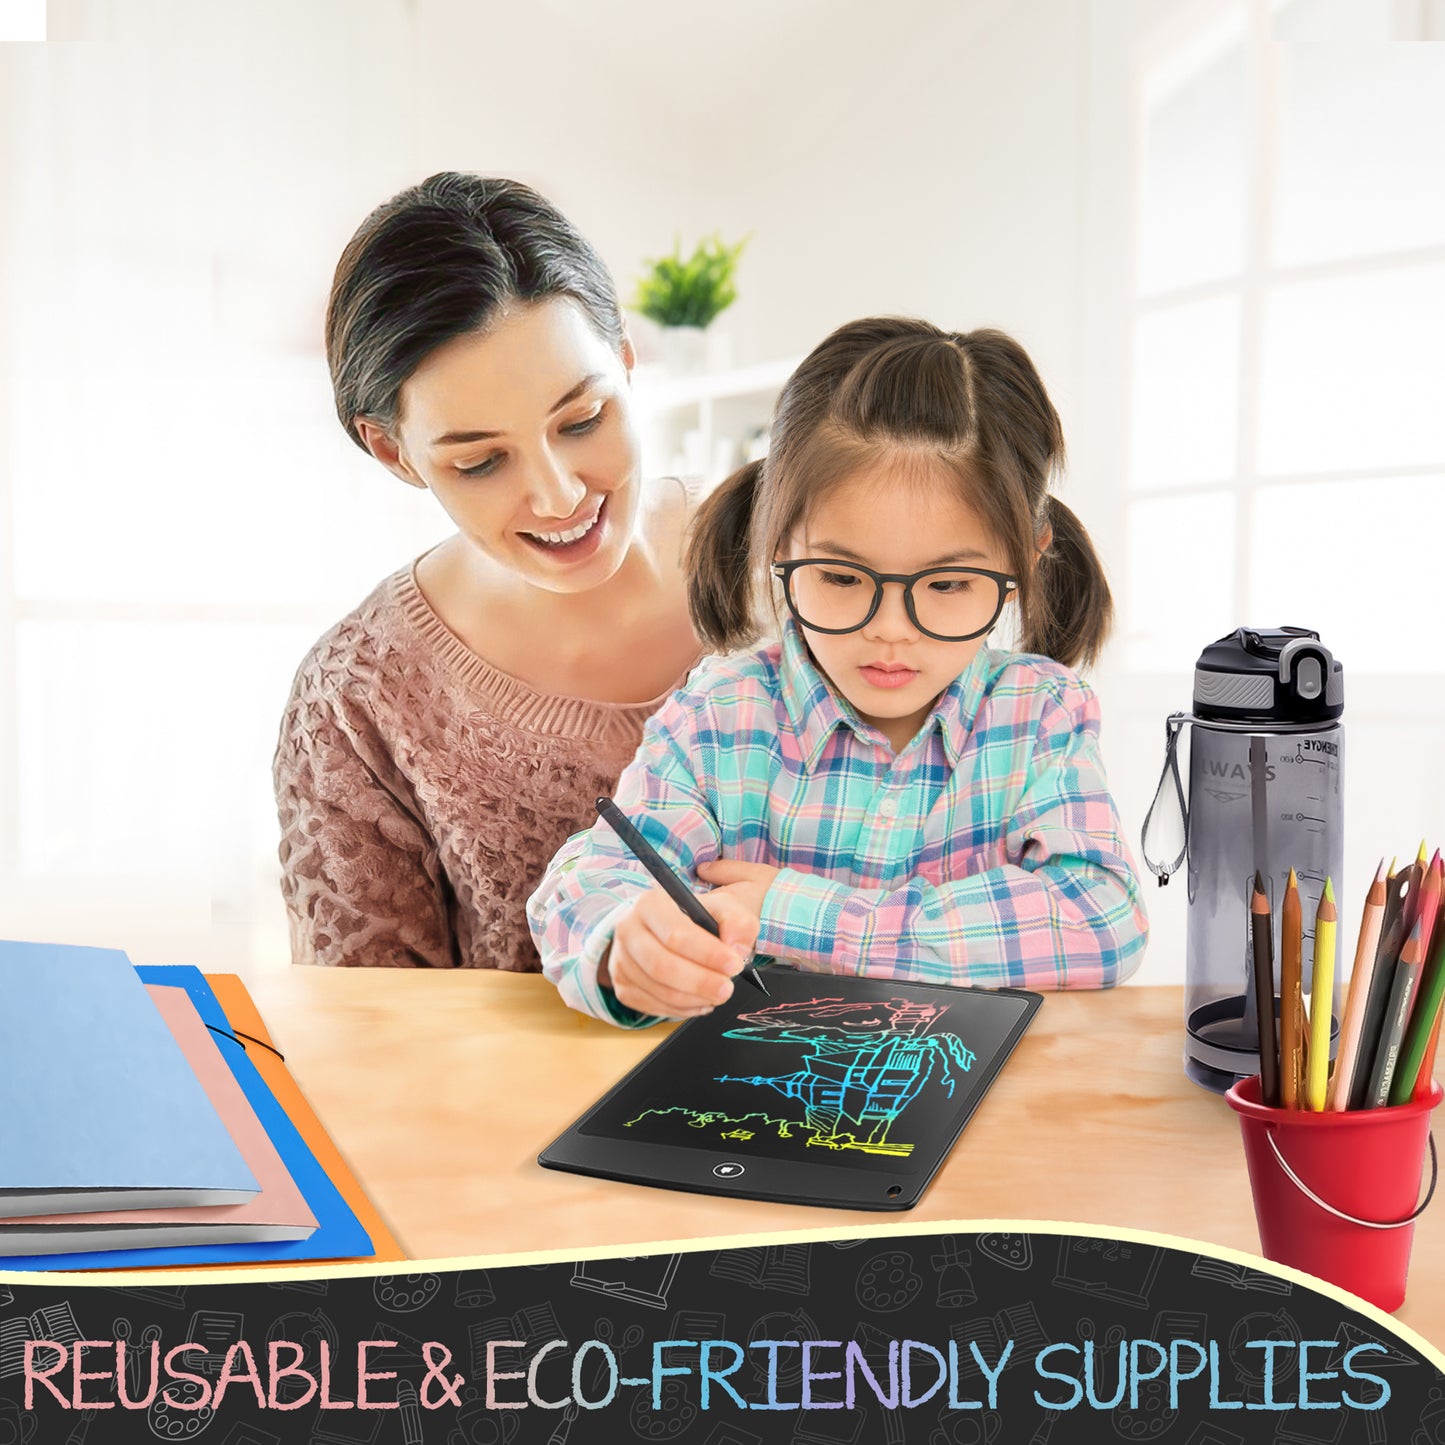 Eco-Friendly School Kit for Elementary, Middle School with LCD Tablet